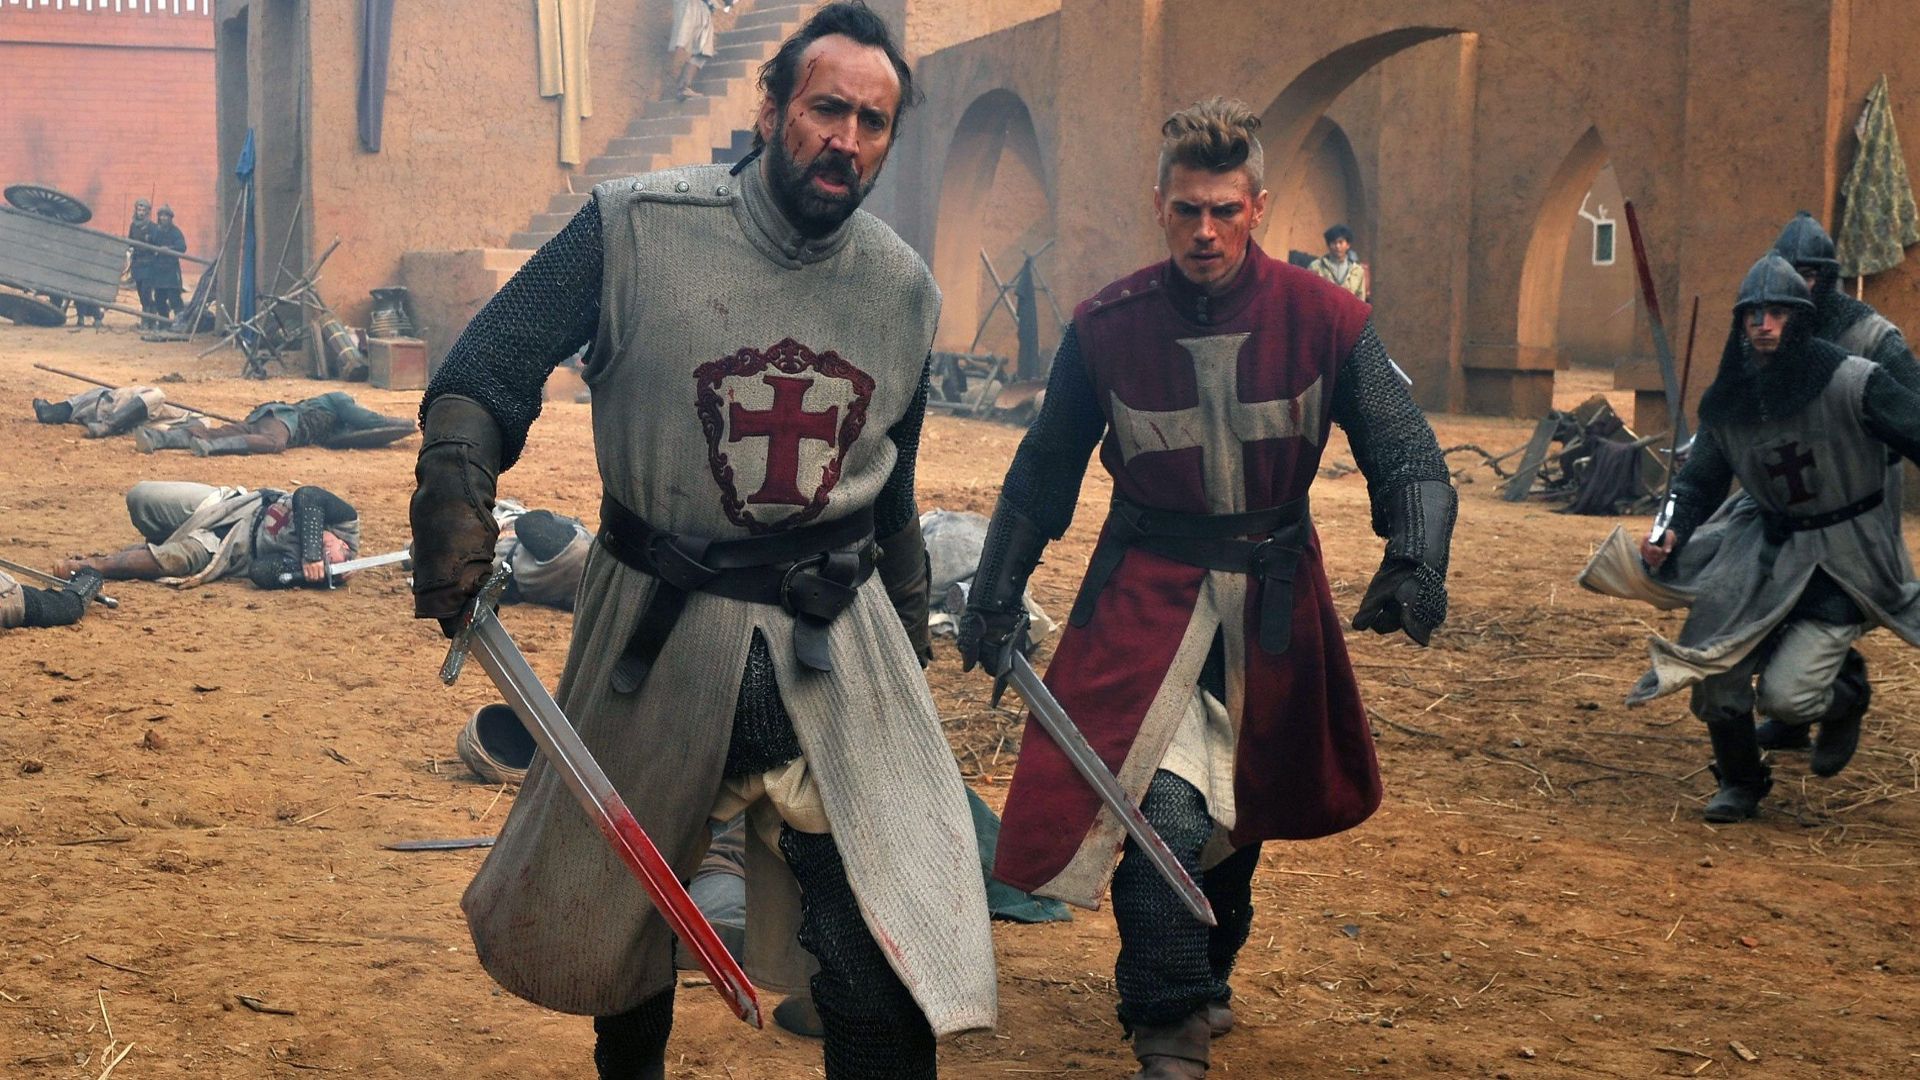 Gallain and Jacob walk with swords in Outcast